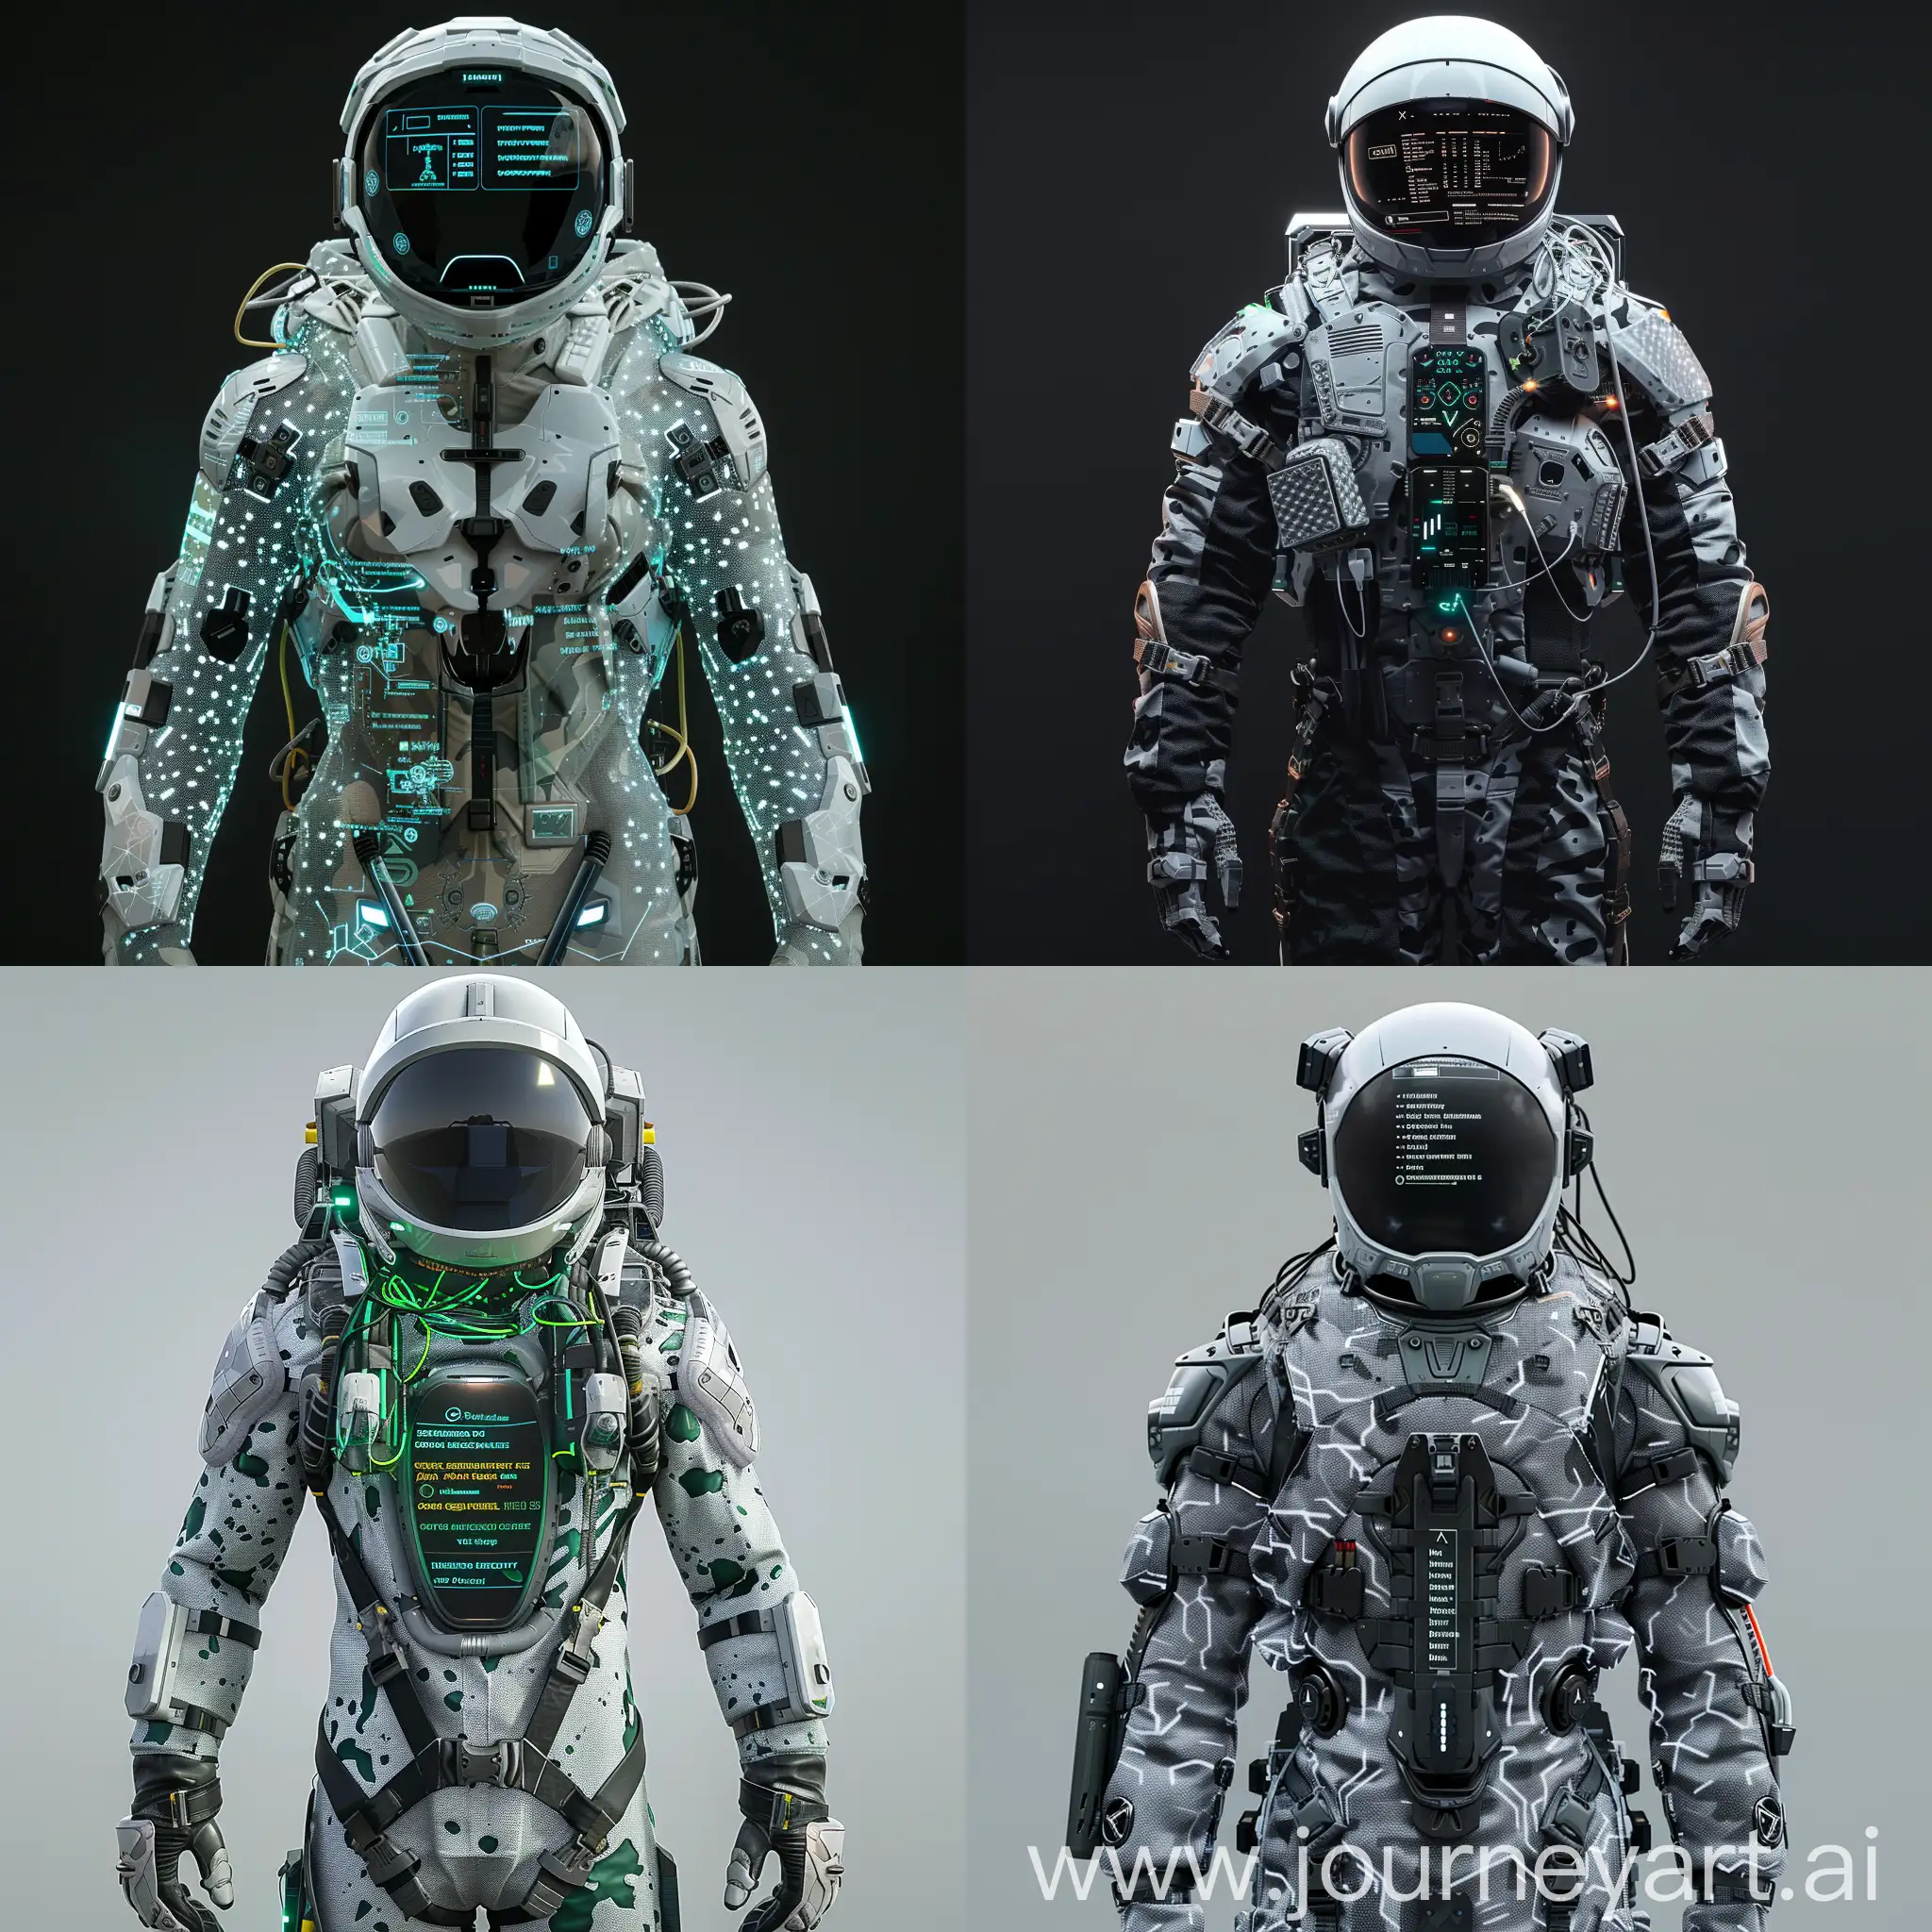 Advanced-Futuristic-Space-Suit-with-AIAssisted-Features-and-Cybersecurity-Measures